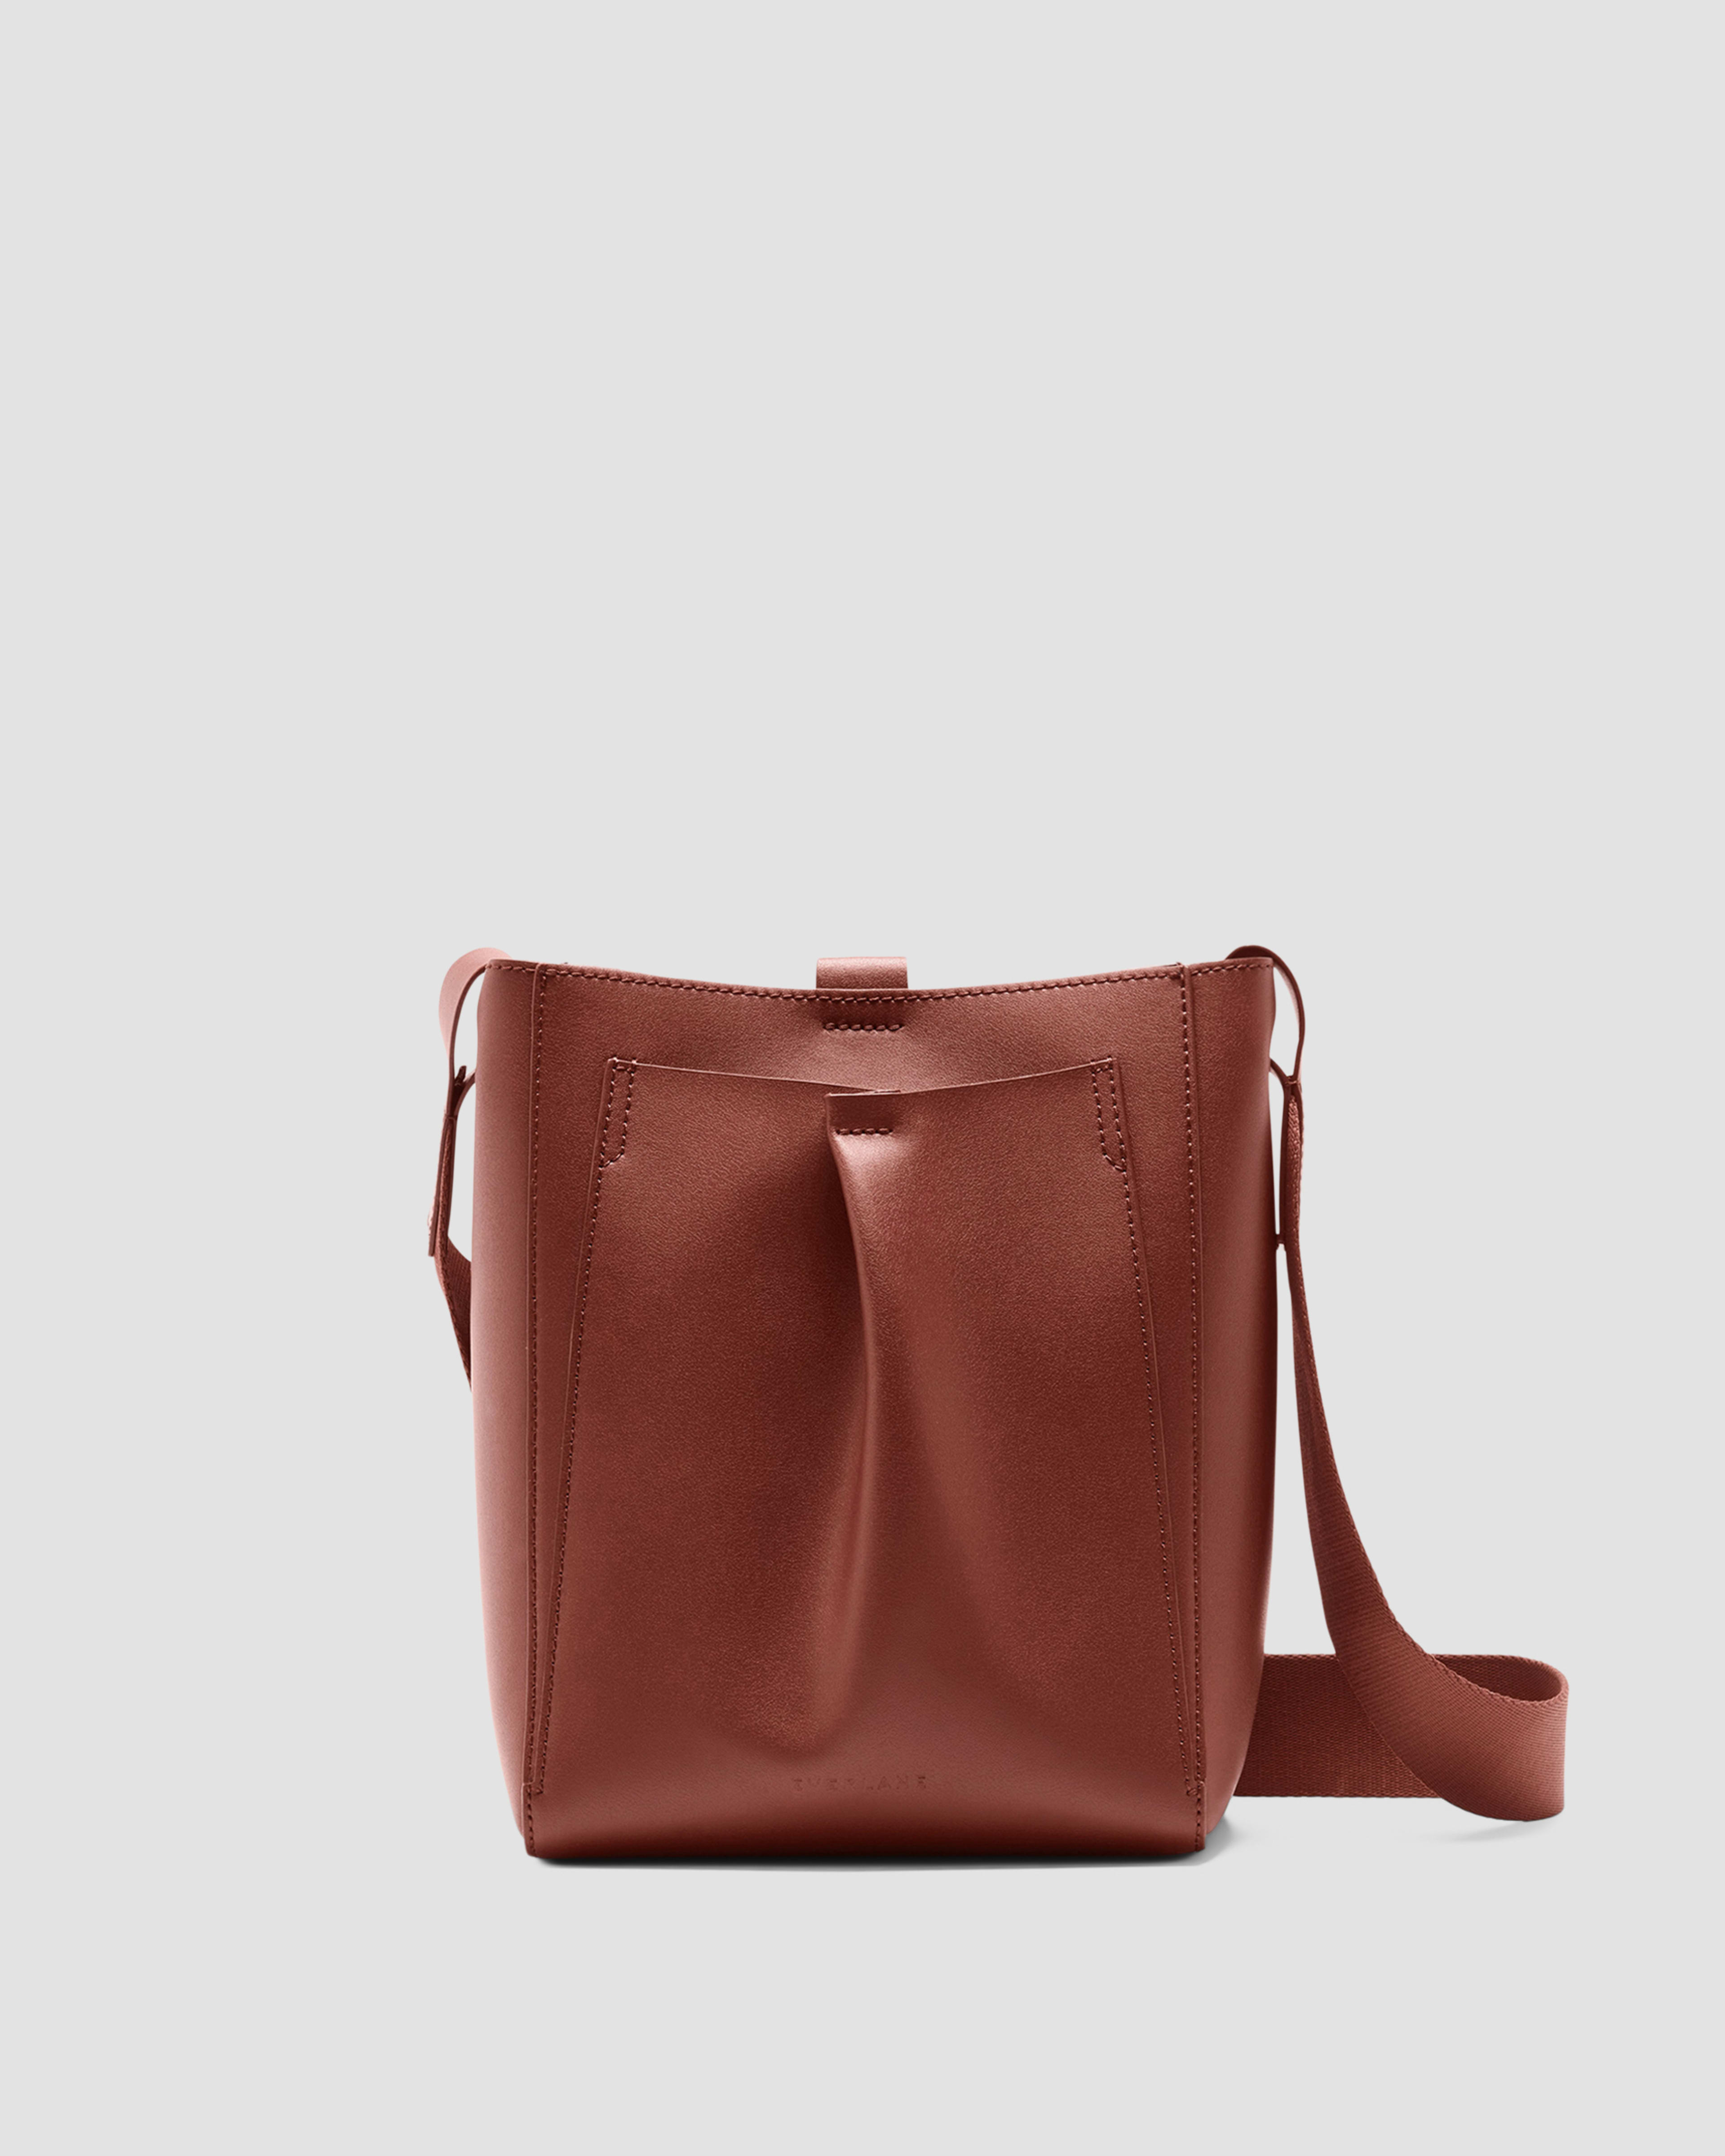 60+ Minimalist Bags That Whisper Chic—From The Row to Everlane